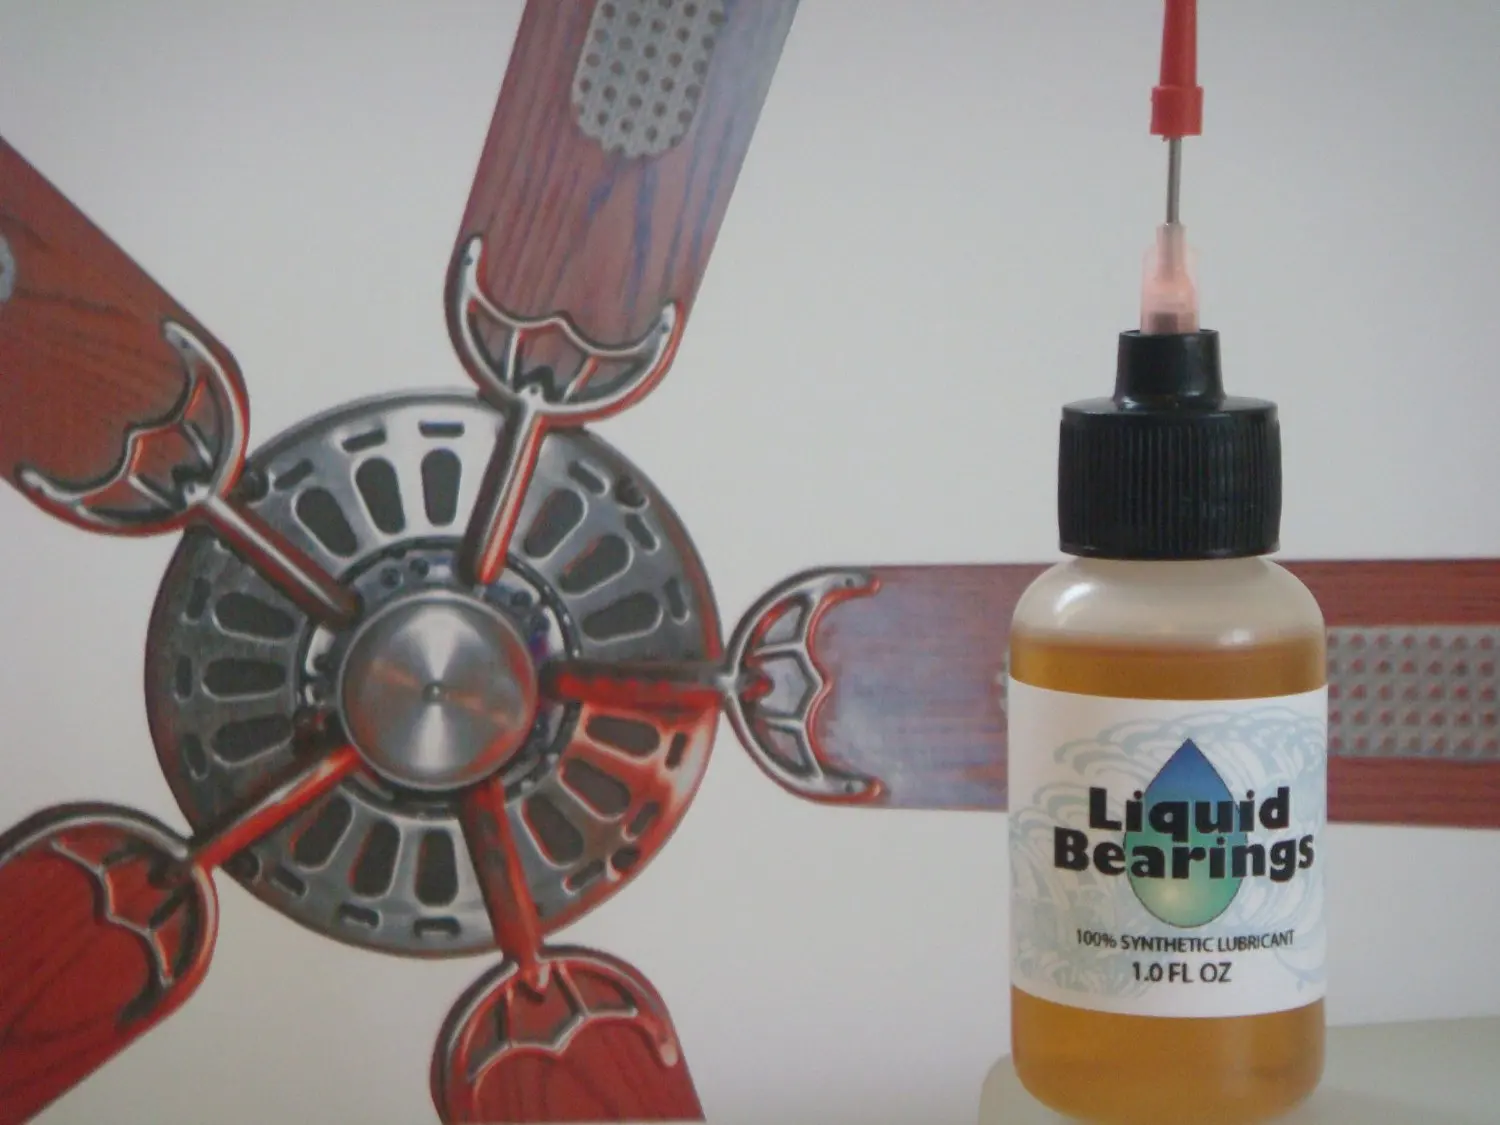 Buy Liquid Bearings The Best 100 Synthetic Oil For Ceiling